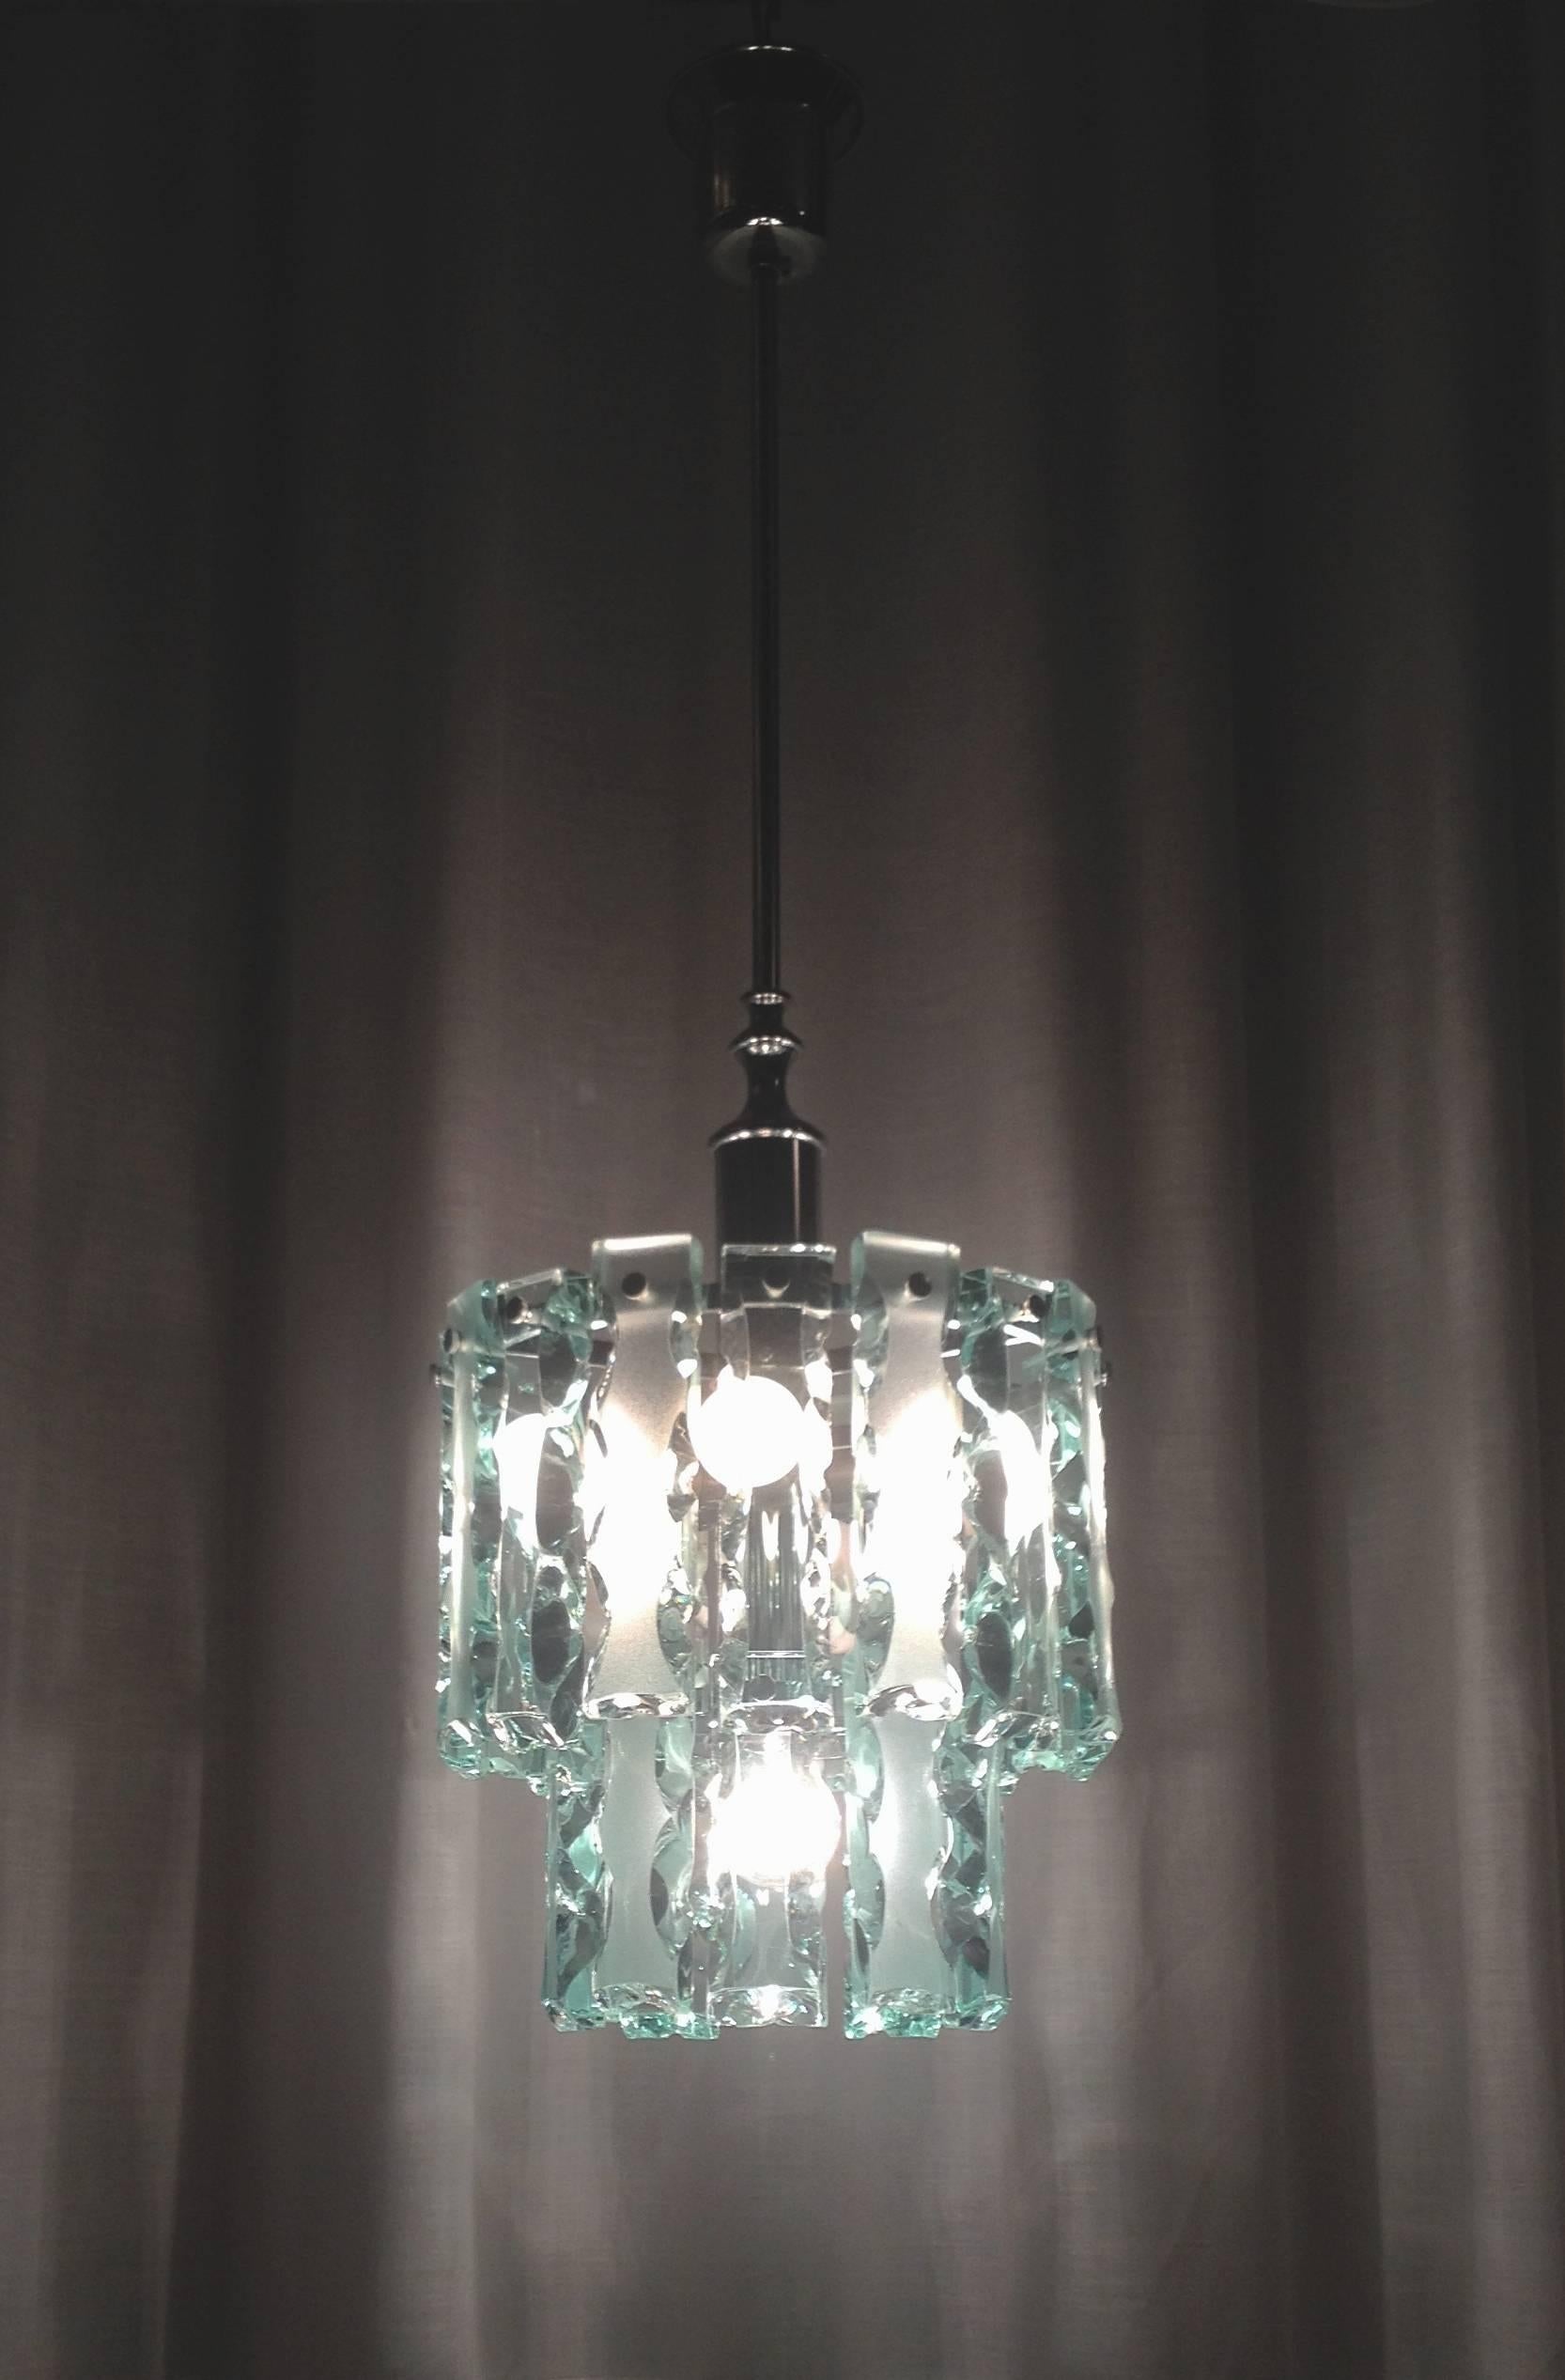 this Pendant features  two rows of hand chiseled frosted glass hanging from a chrome plated frame with small chromed knobs and suits 6 bulbs. 
Zero Quattro chandeliers were made for only a short time. The Milan based company  produced some